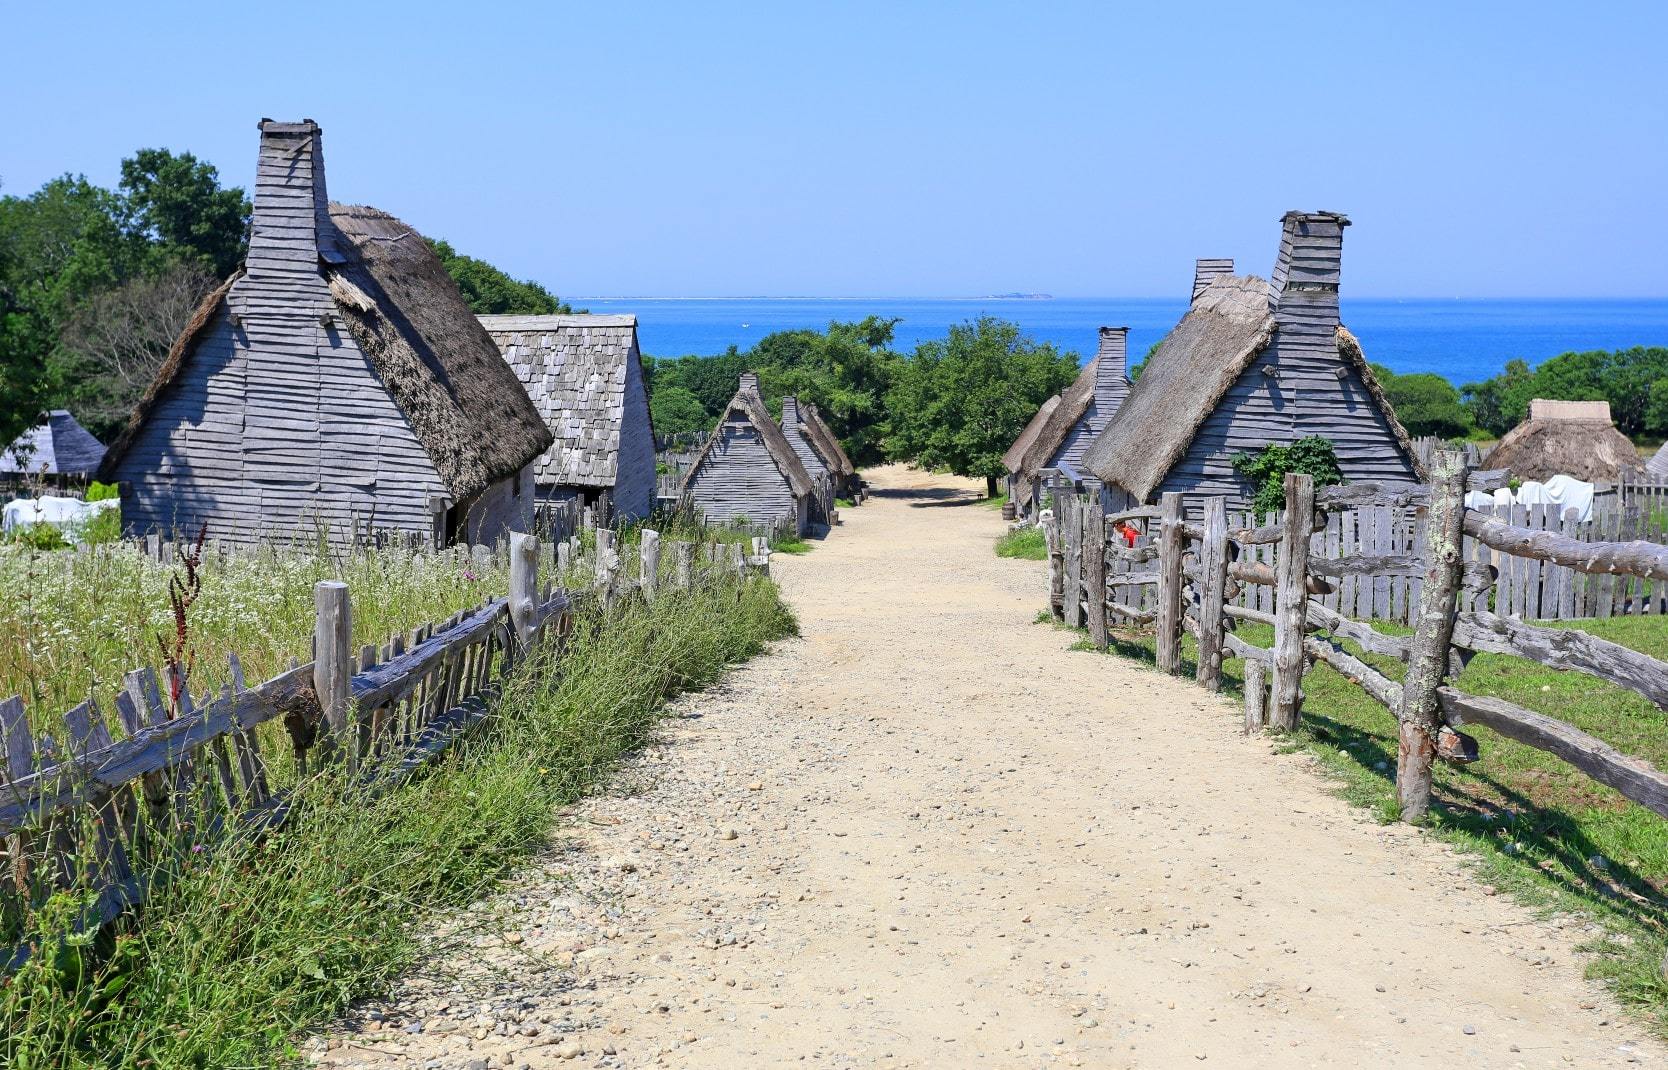 Historic buildings at Plimoth plantation in Plymouth, Massachusetts